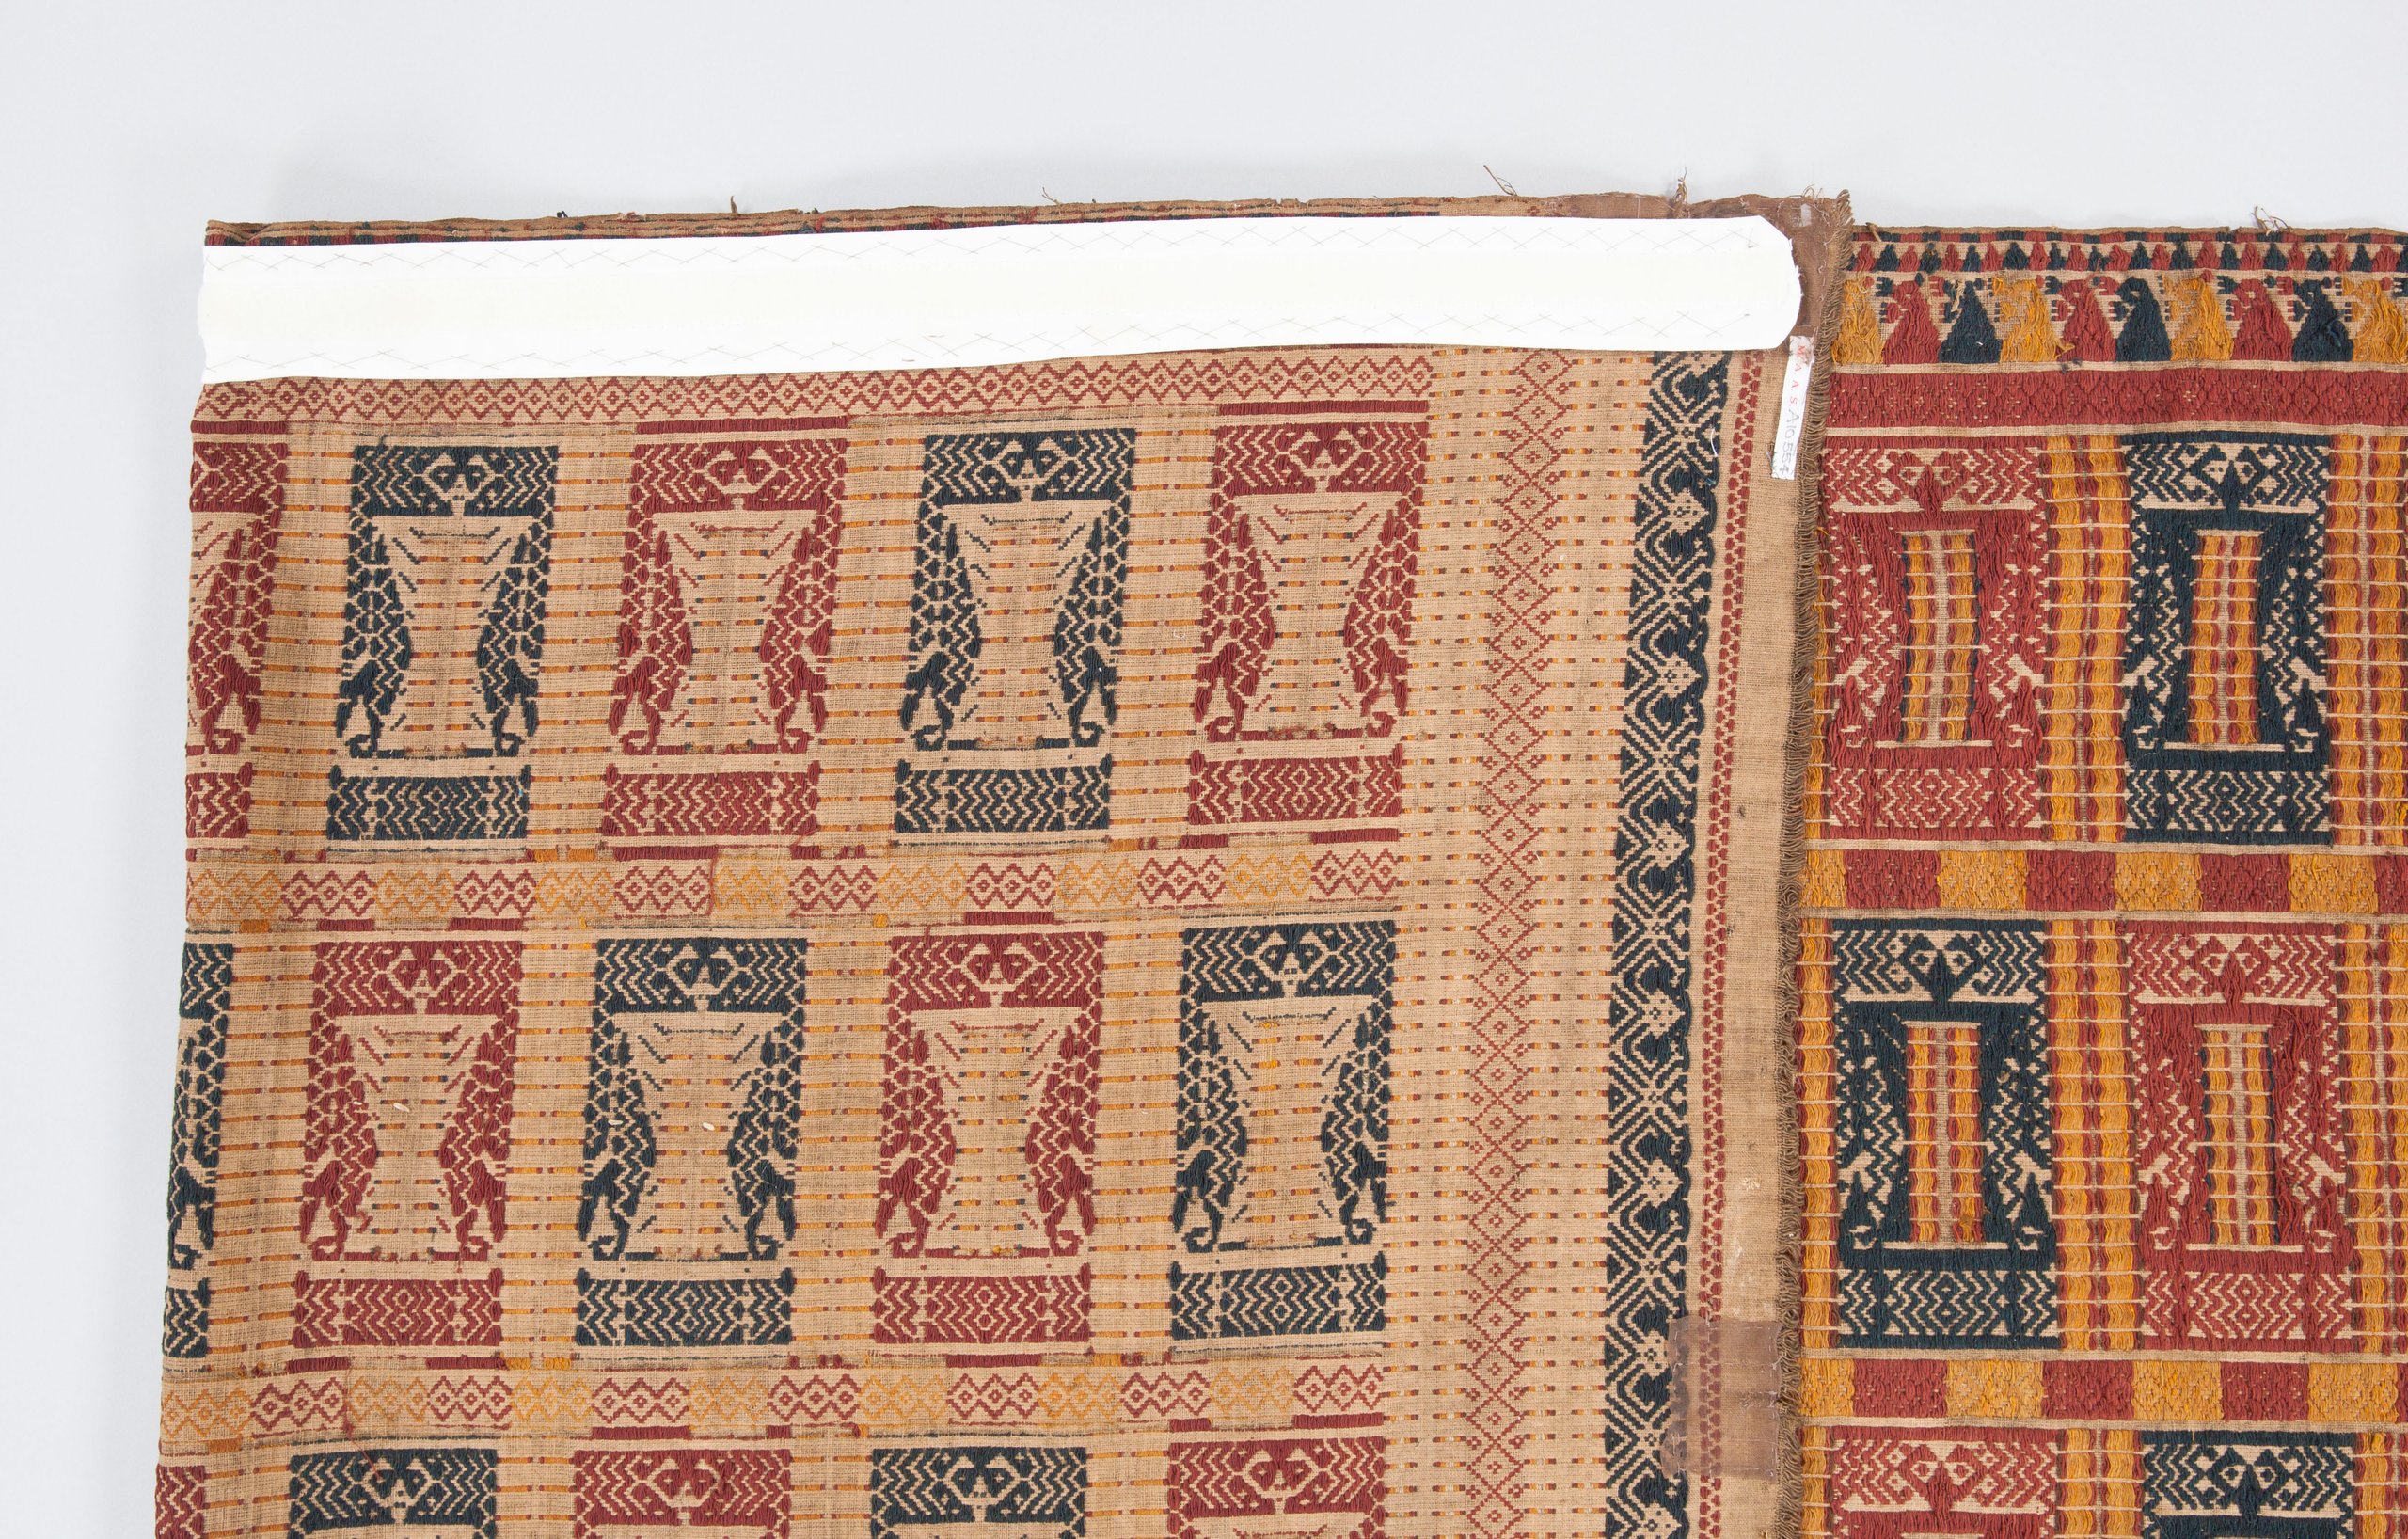 Late 18th century textile from Indonesia